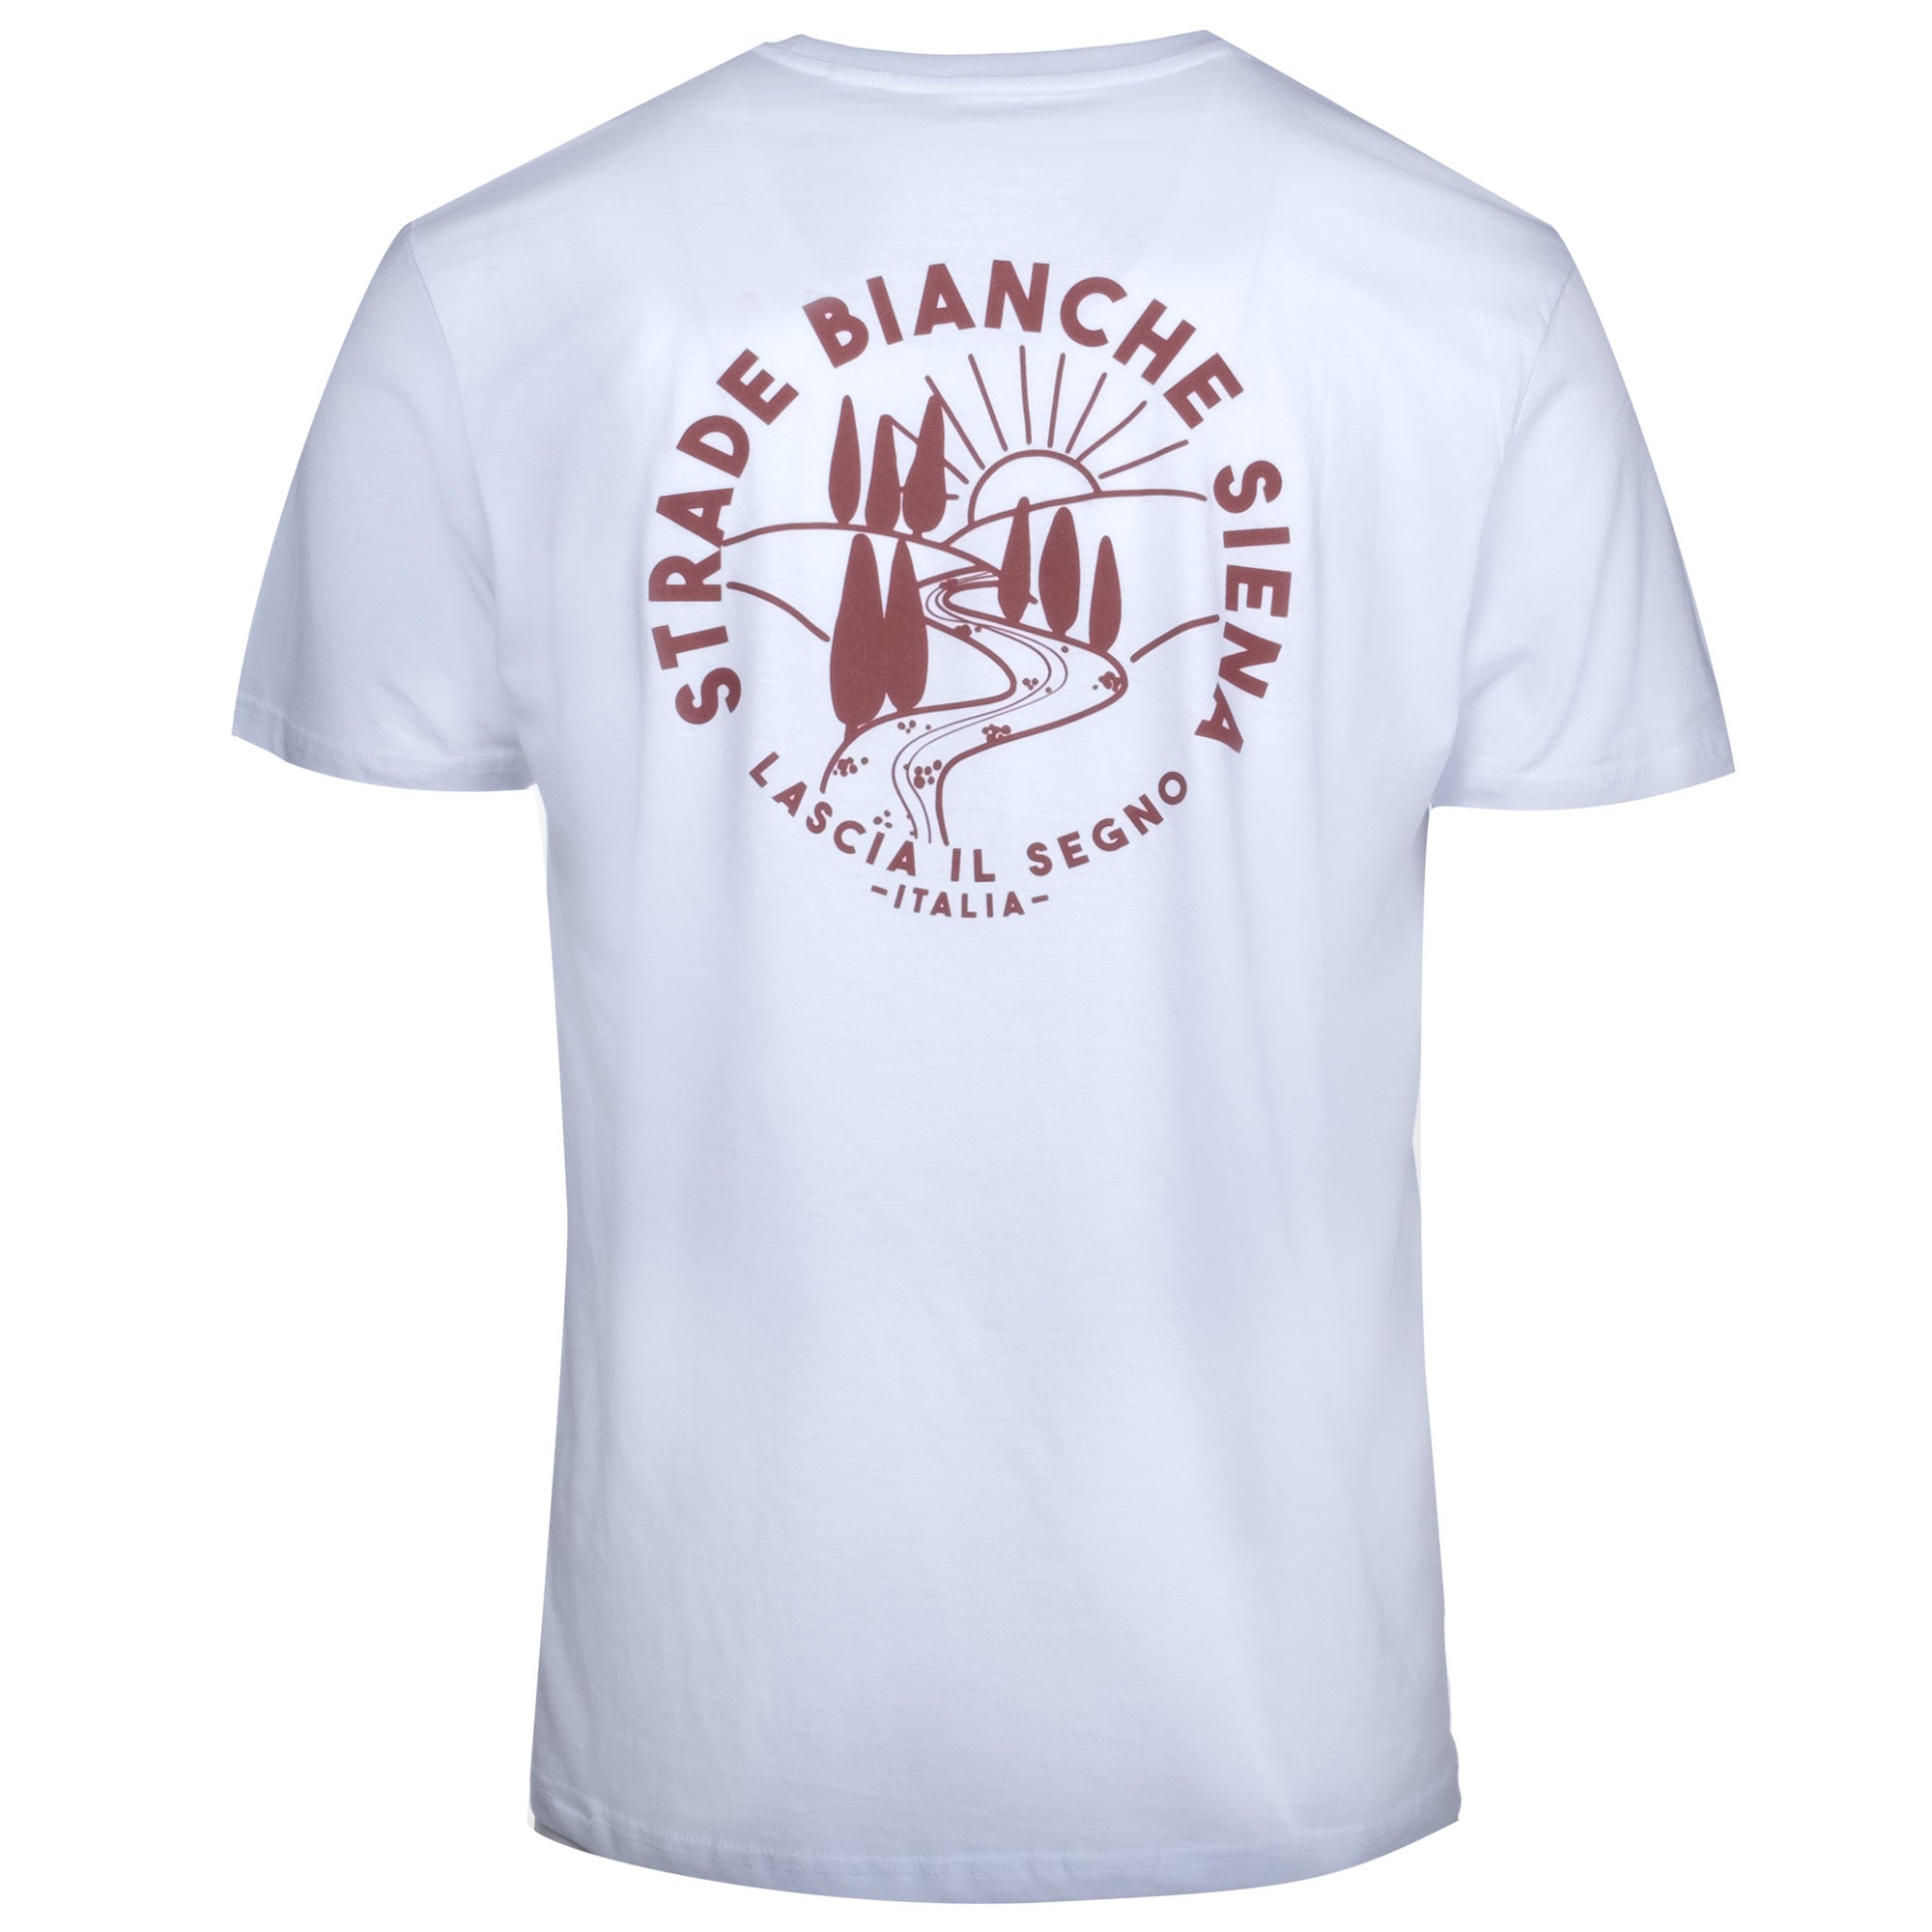 White Roads T-Shirt - Leave your mark